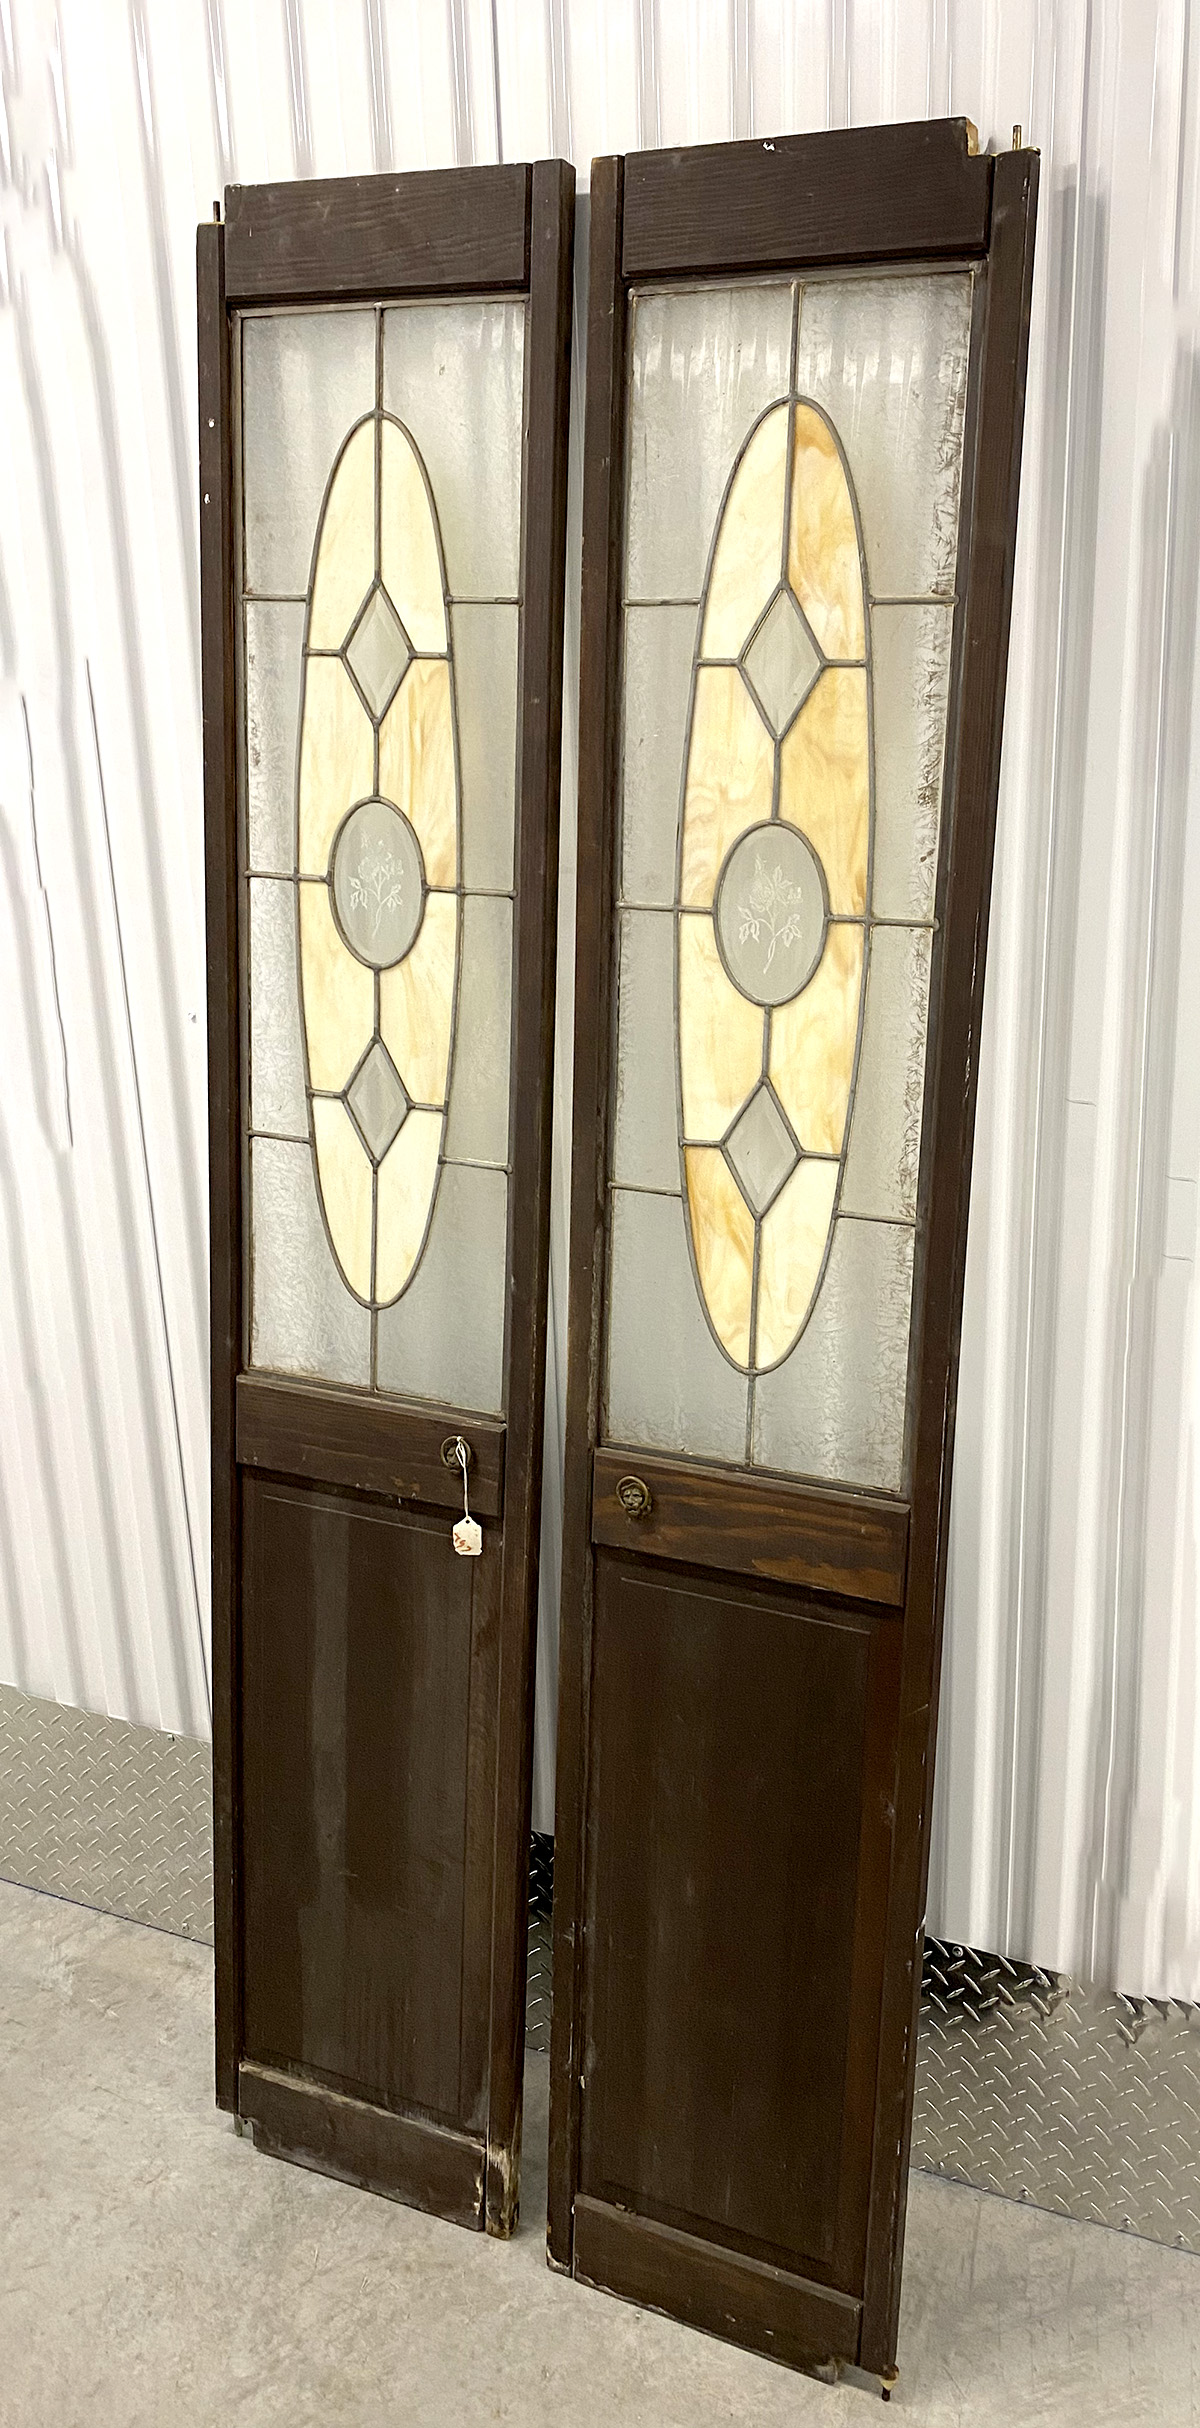 2 ARCHITECTURAL STAINED GLASS DOORS  36d546